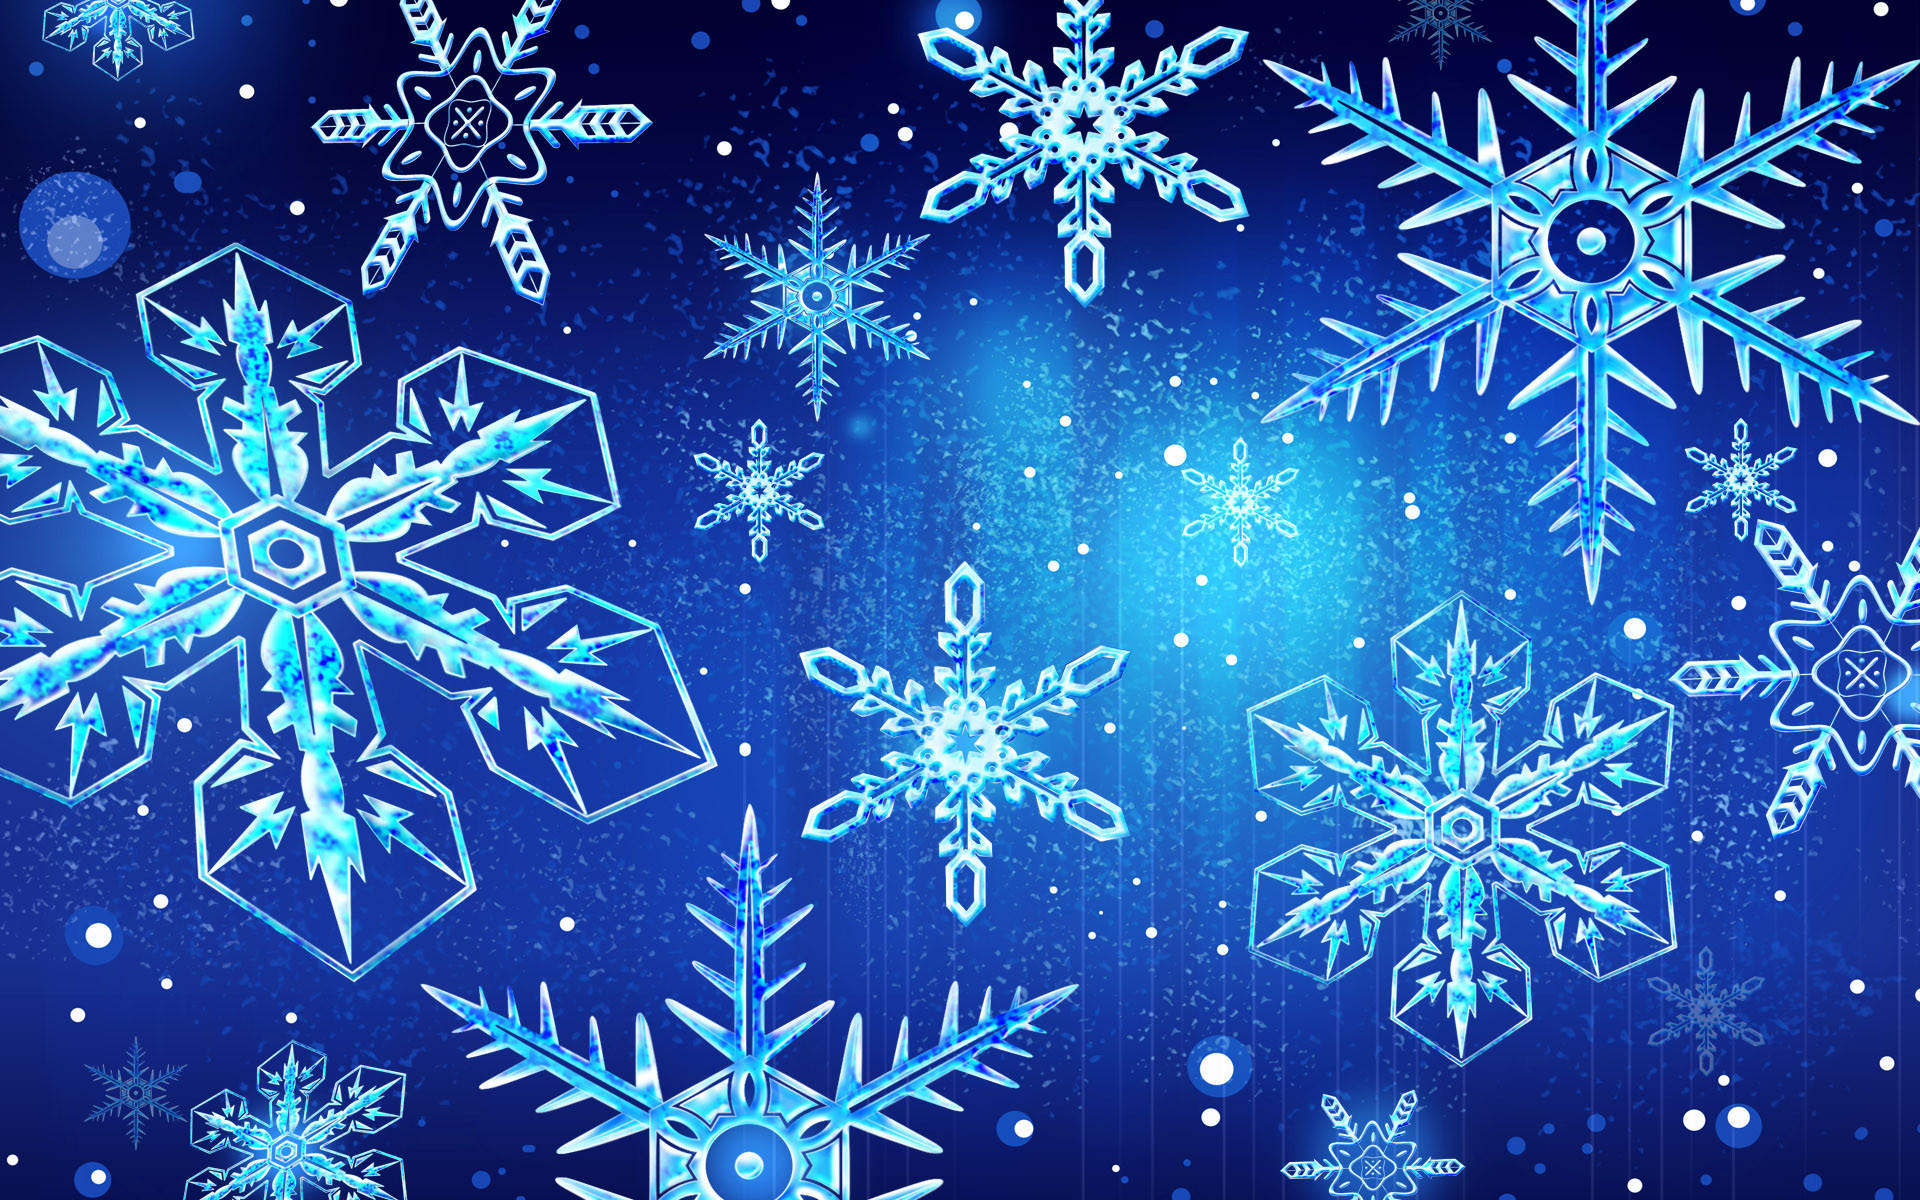 1920x1200 Gallery of 49 Snowflakes Backgrounds, Wallpapers | SHunVMall Graphics